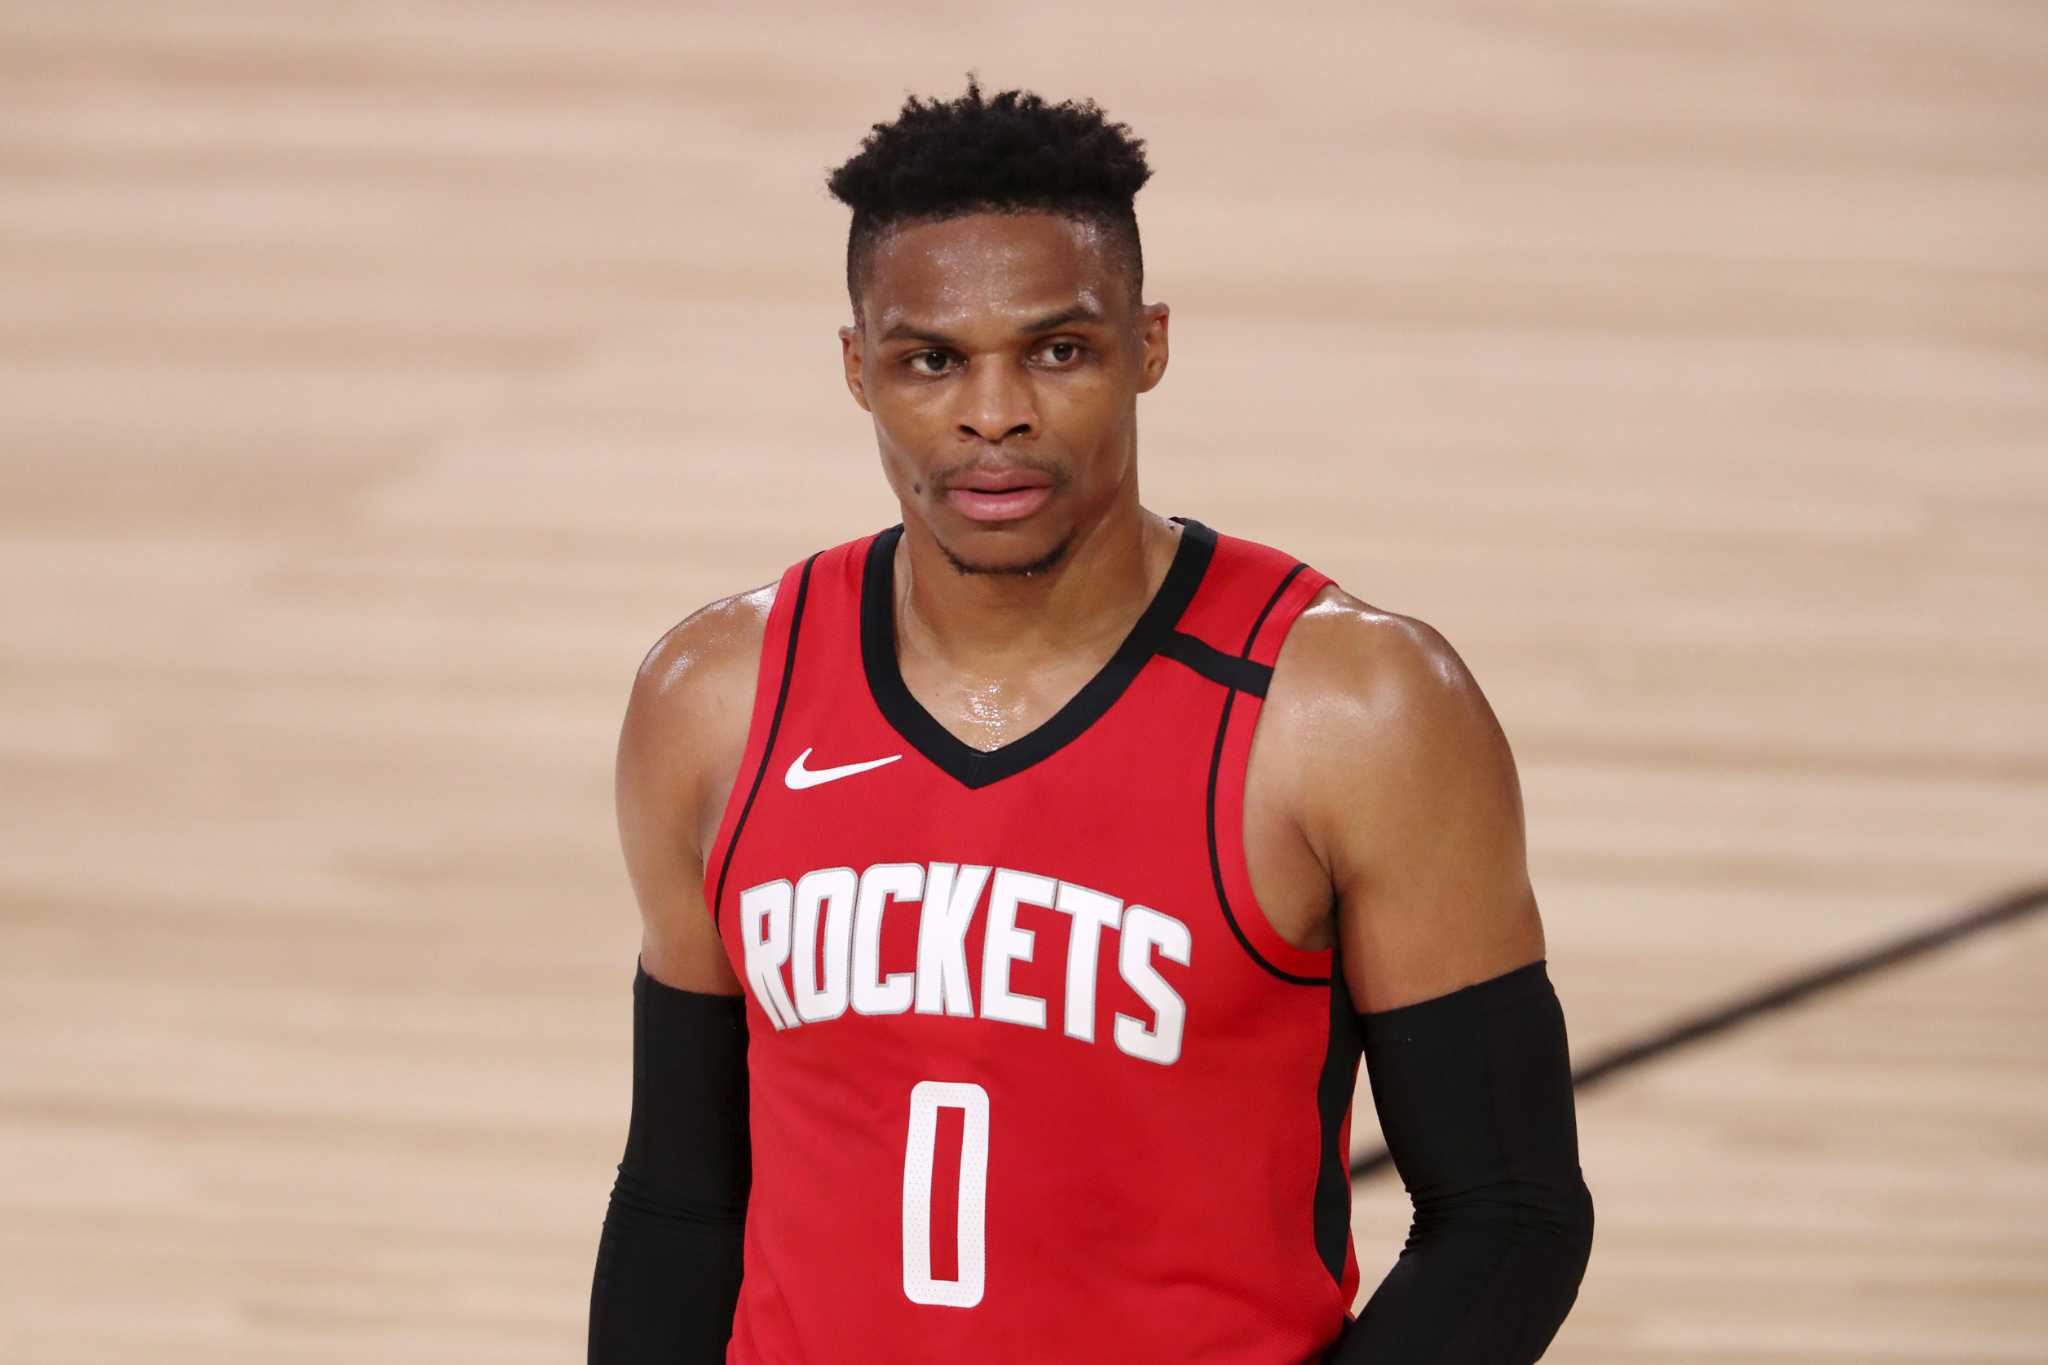 Why B/R was entirely wrong in slight of Rockets' Russell Westbrook